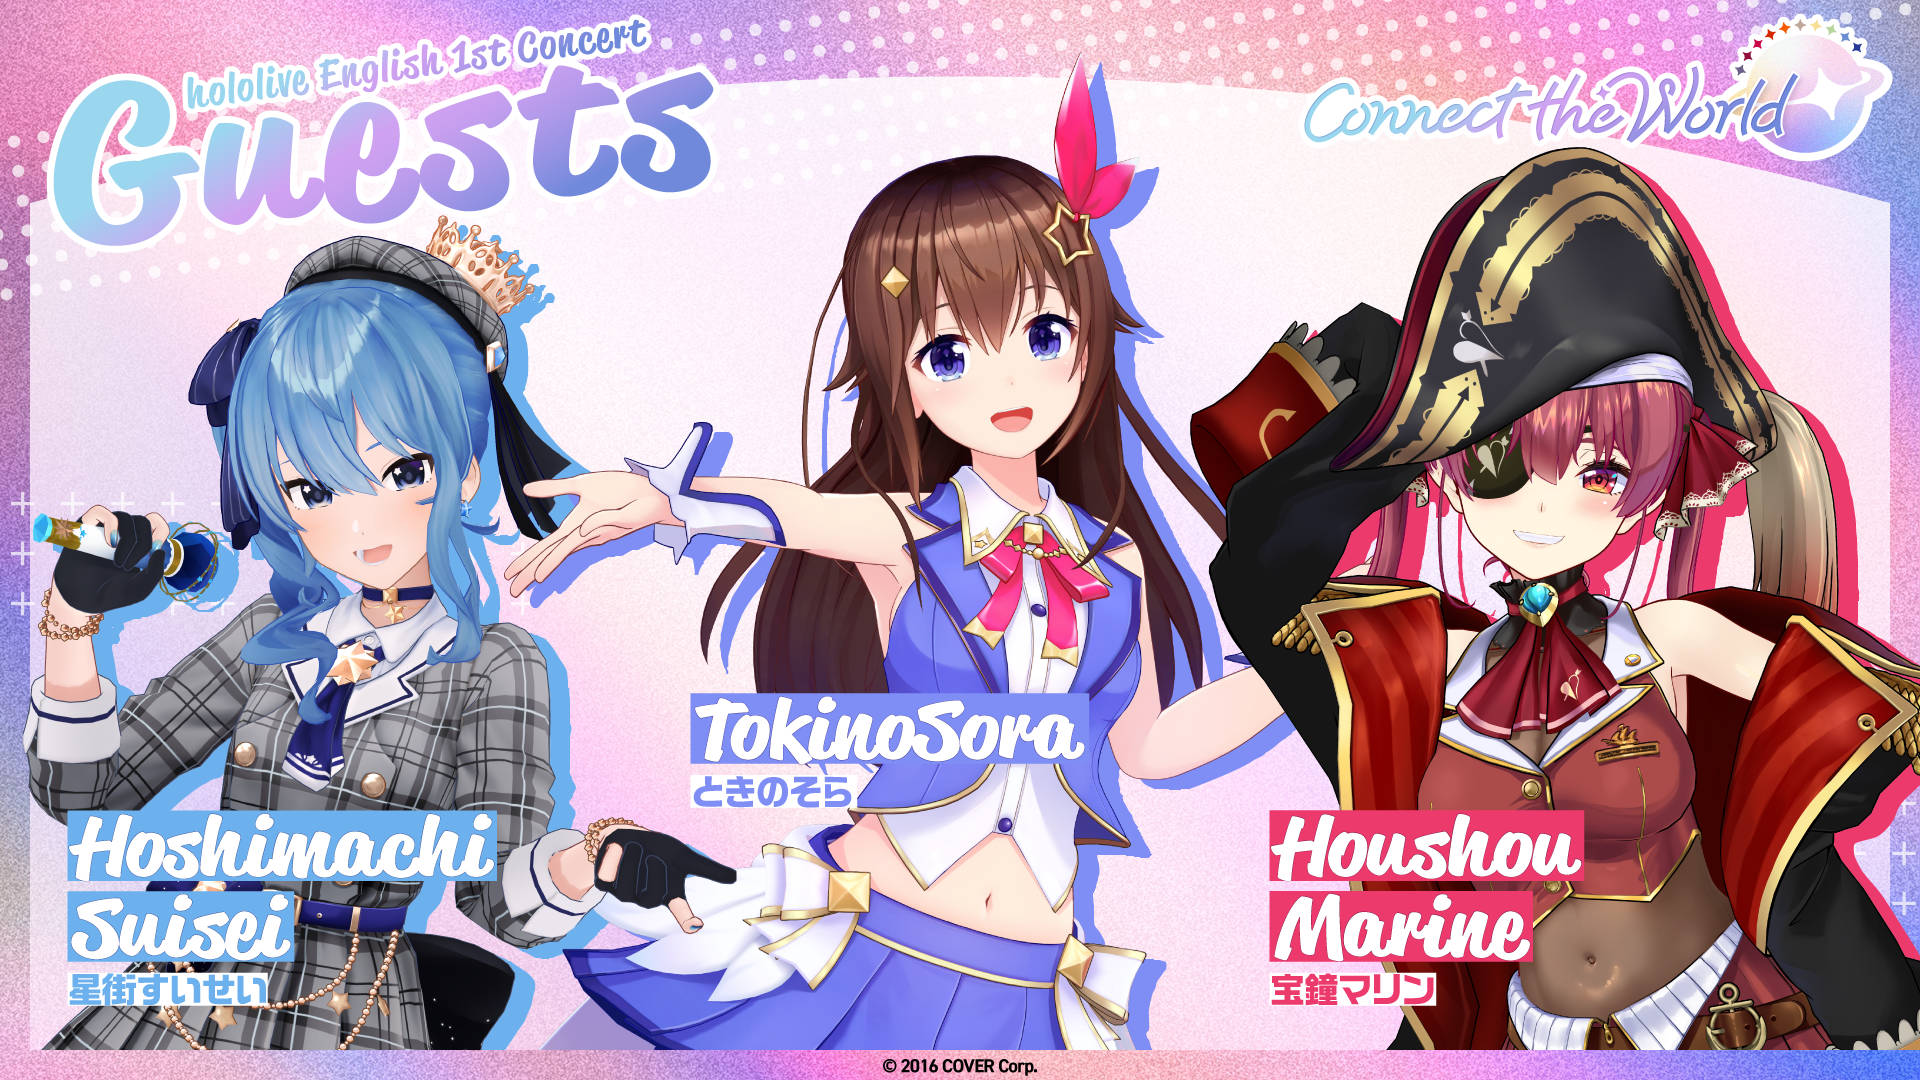 hololive English 1st Concert -Connect the World- Special Guests, New Merchandise and Sponsorship Announcement